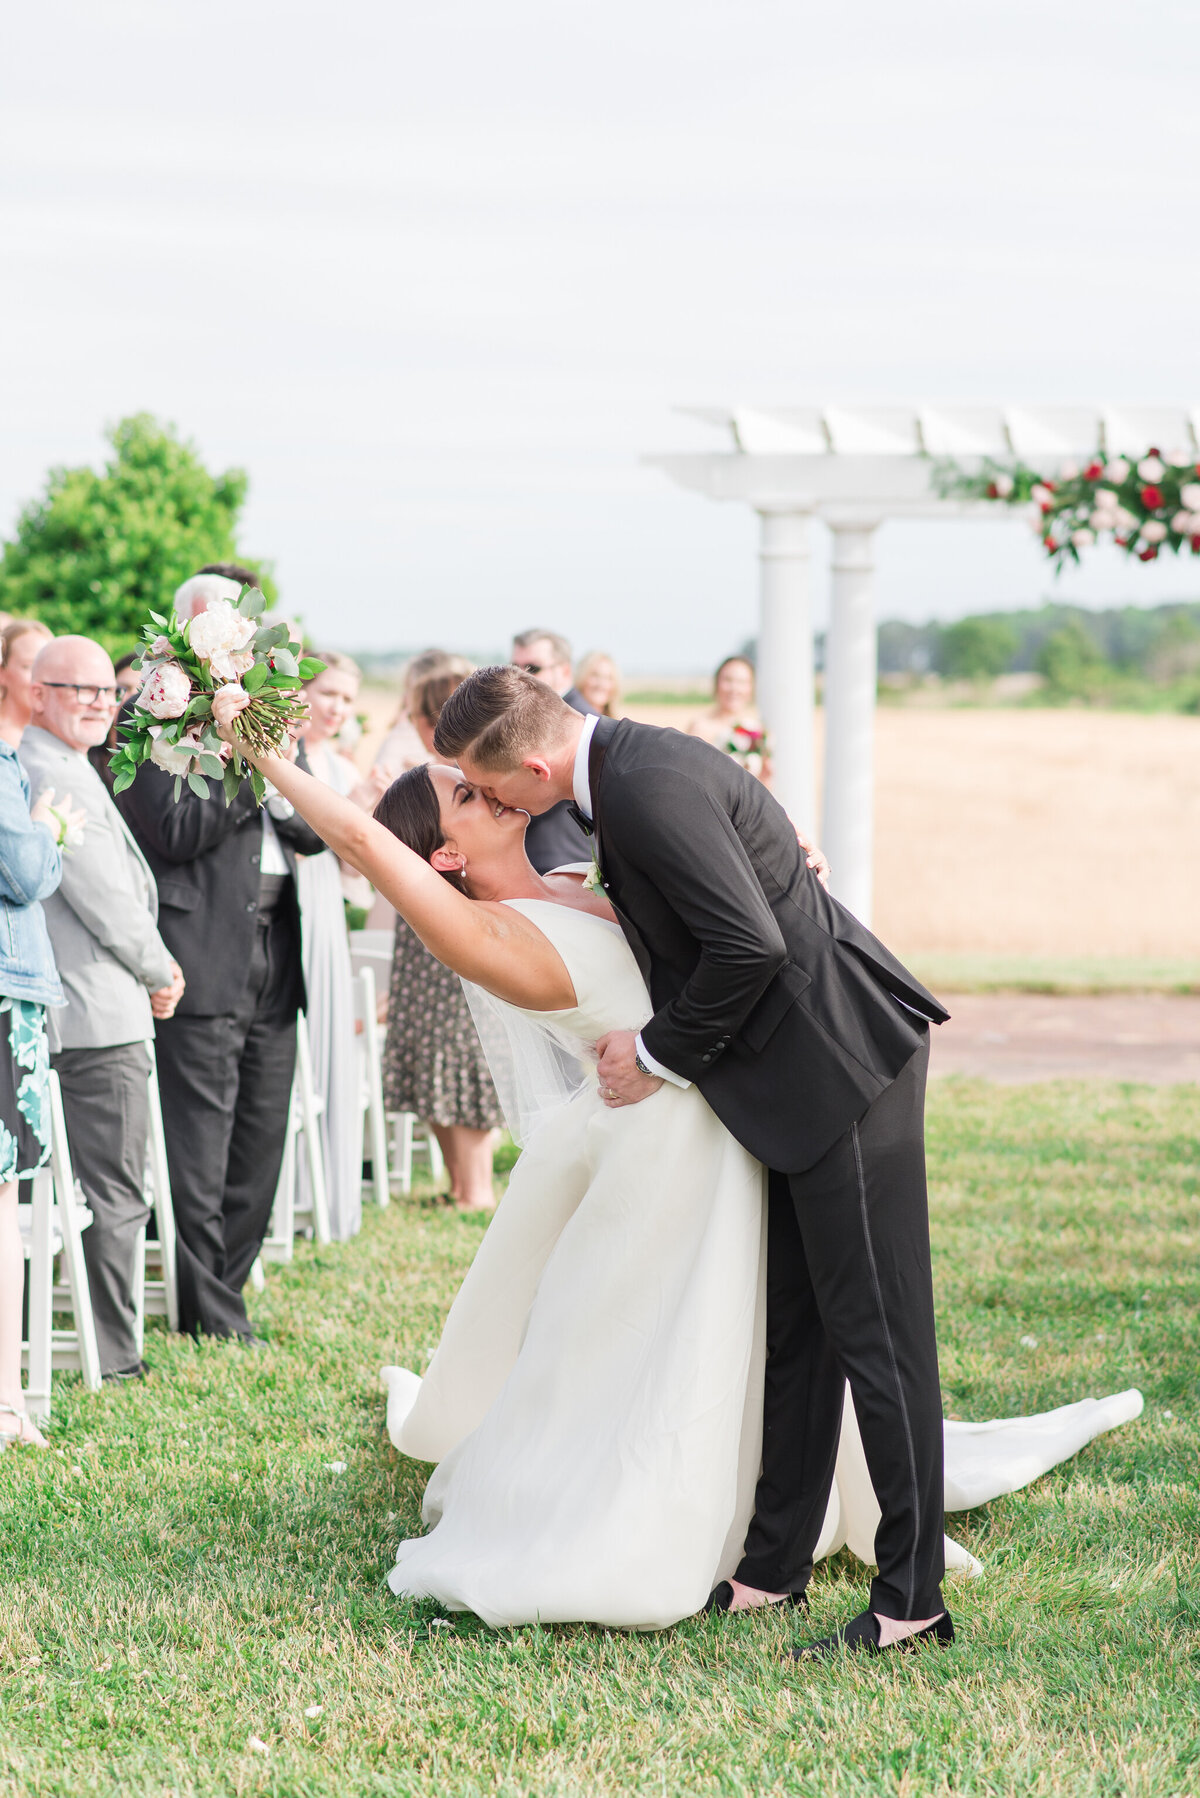 couple kissing qith bouquet in the air after ceremony